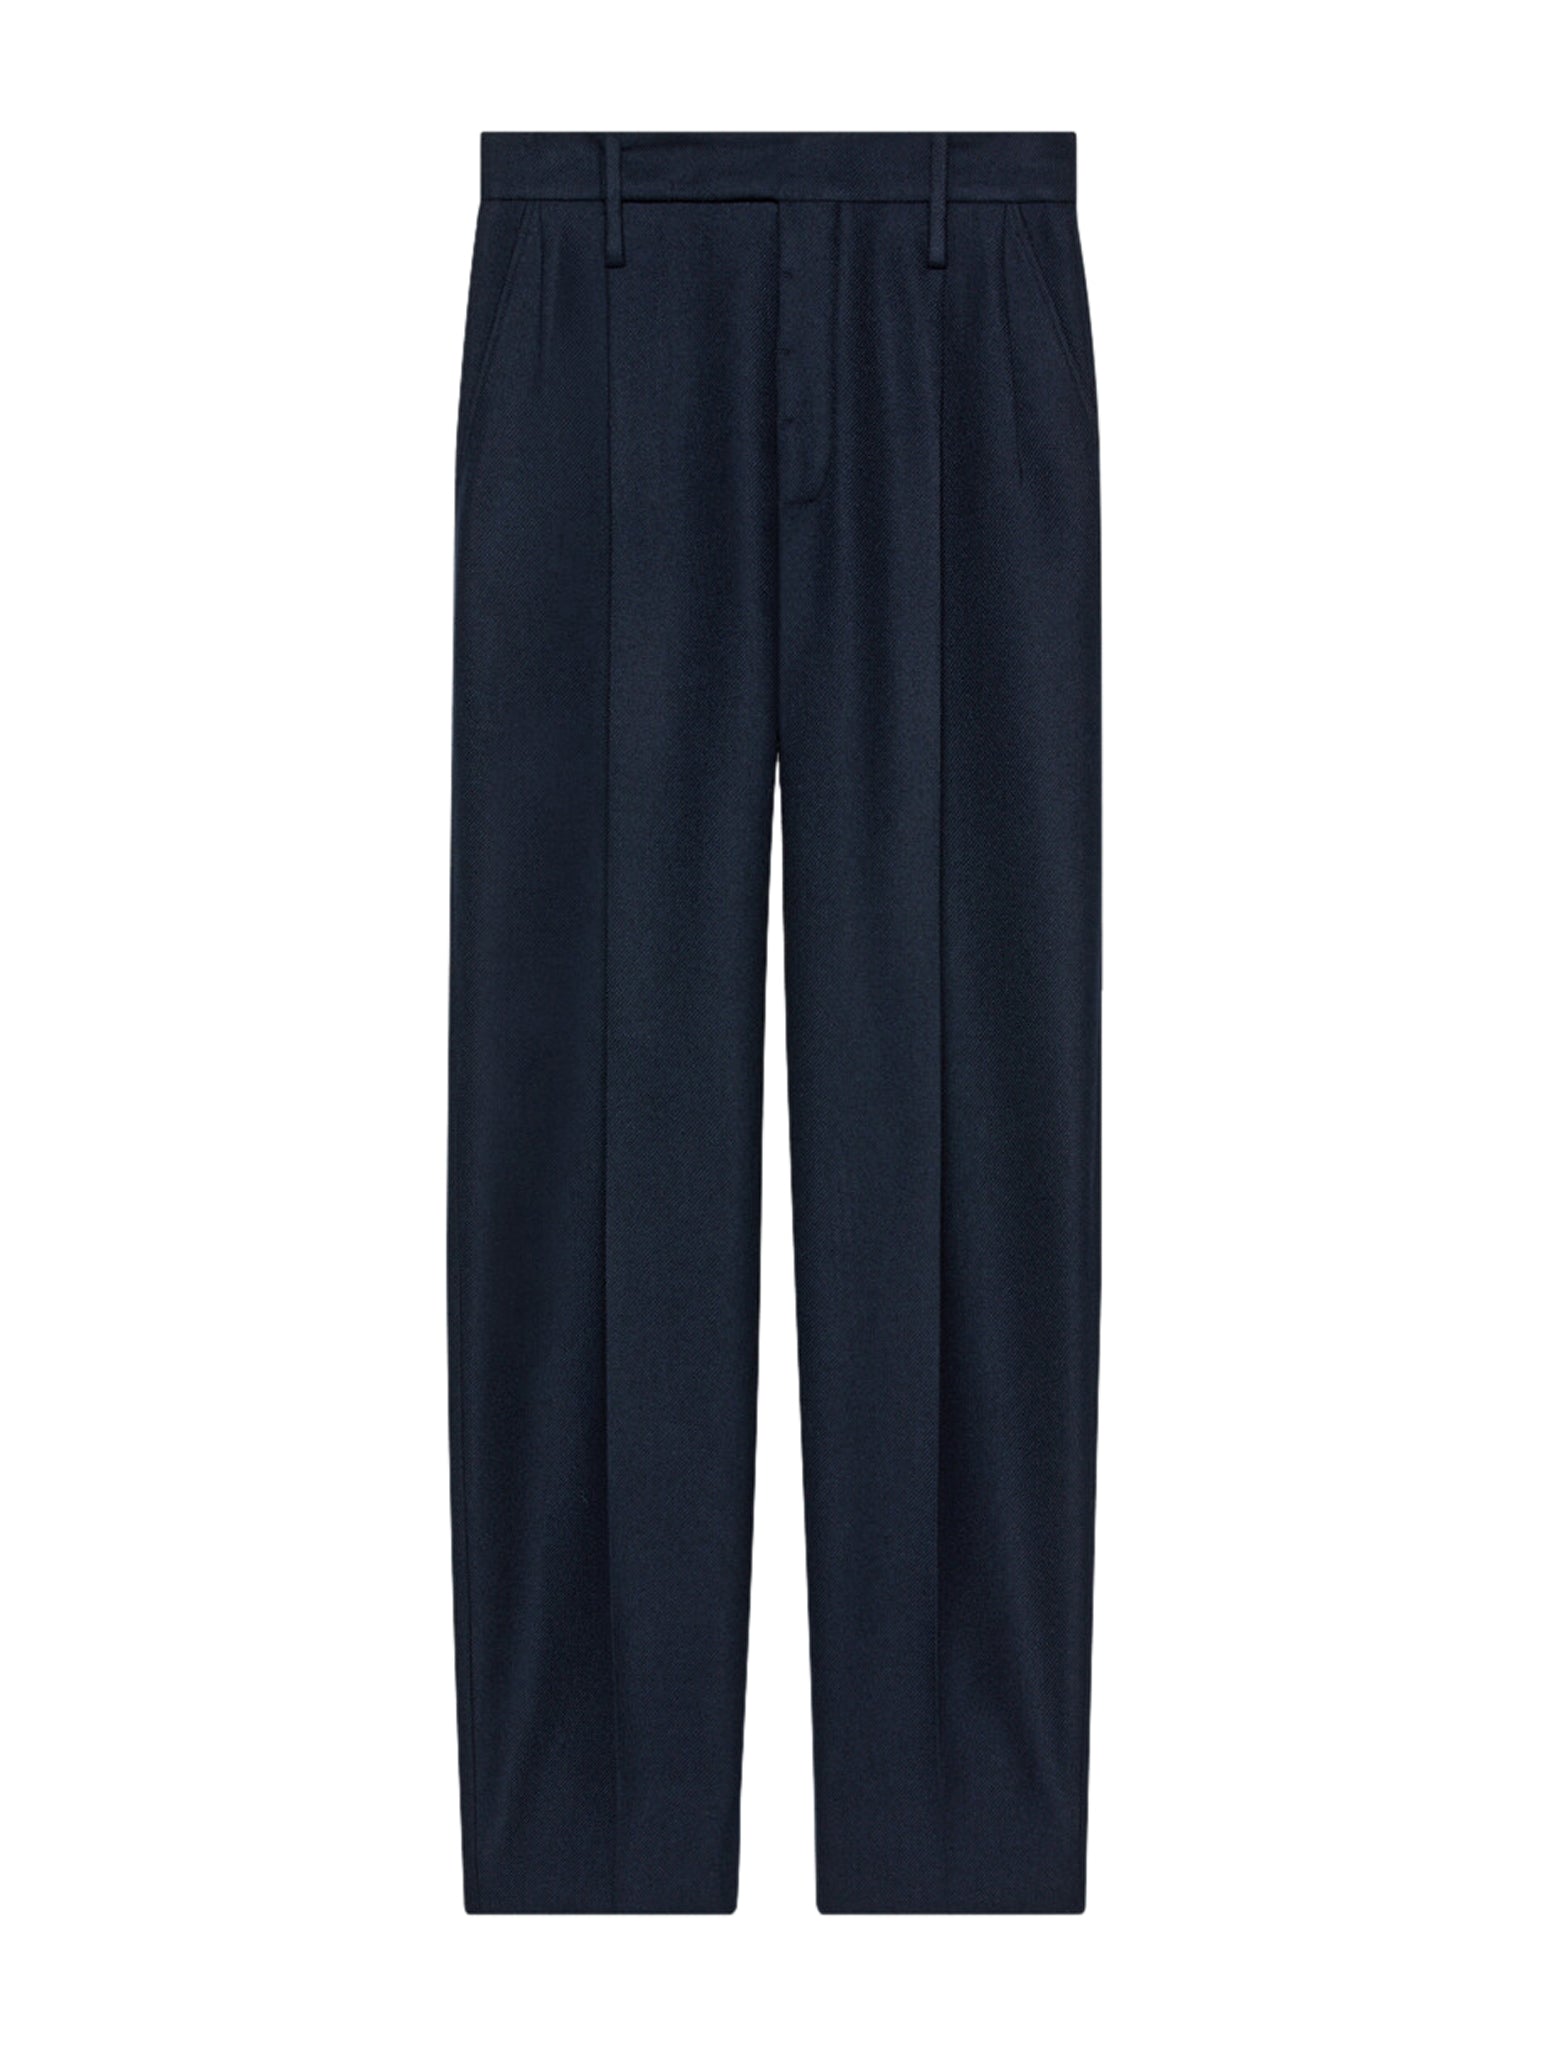 Lightweight cashmere trousers